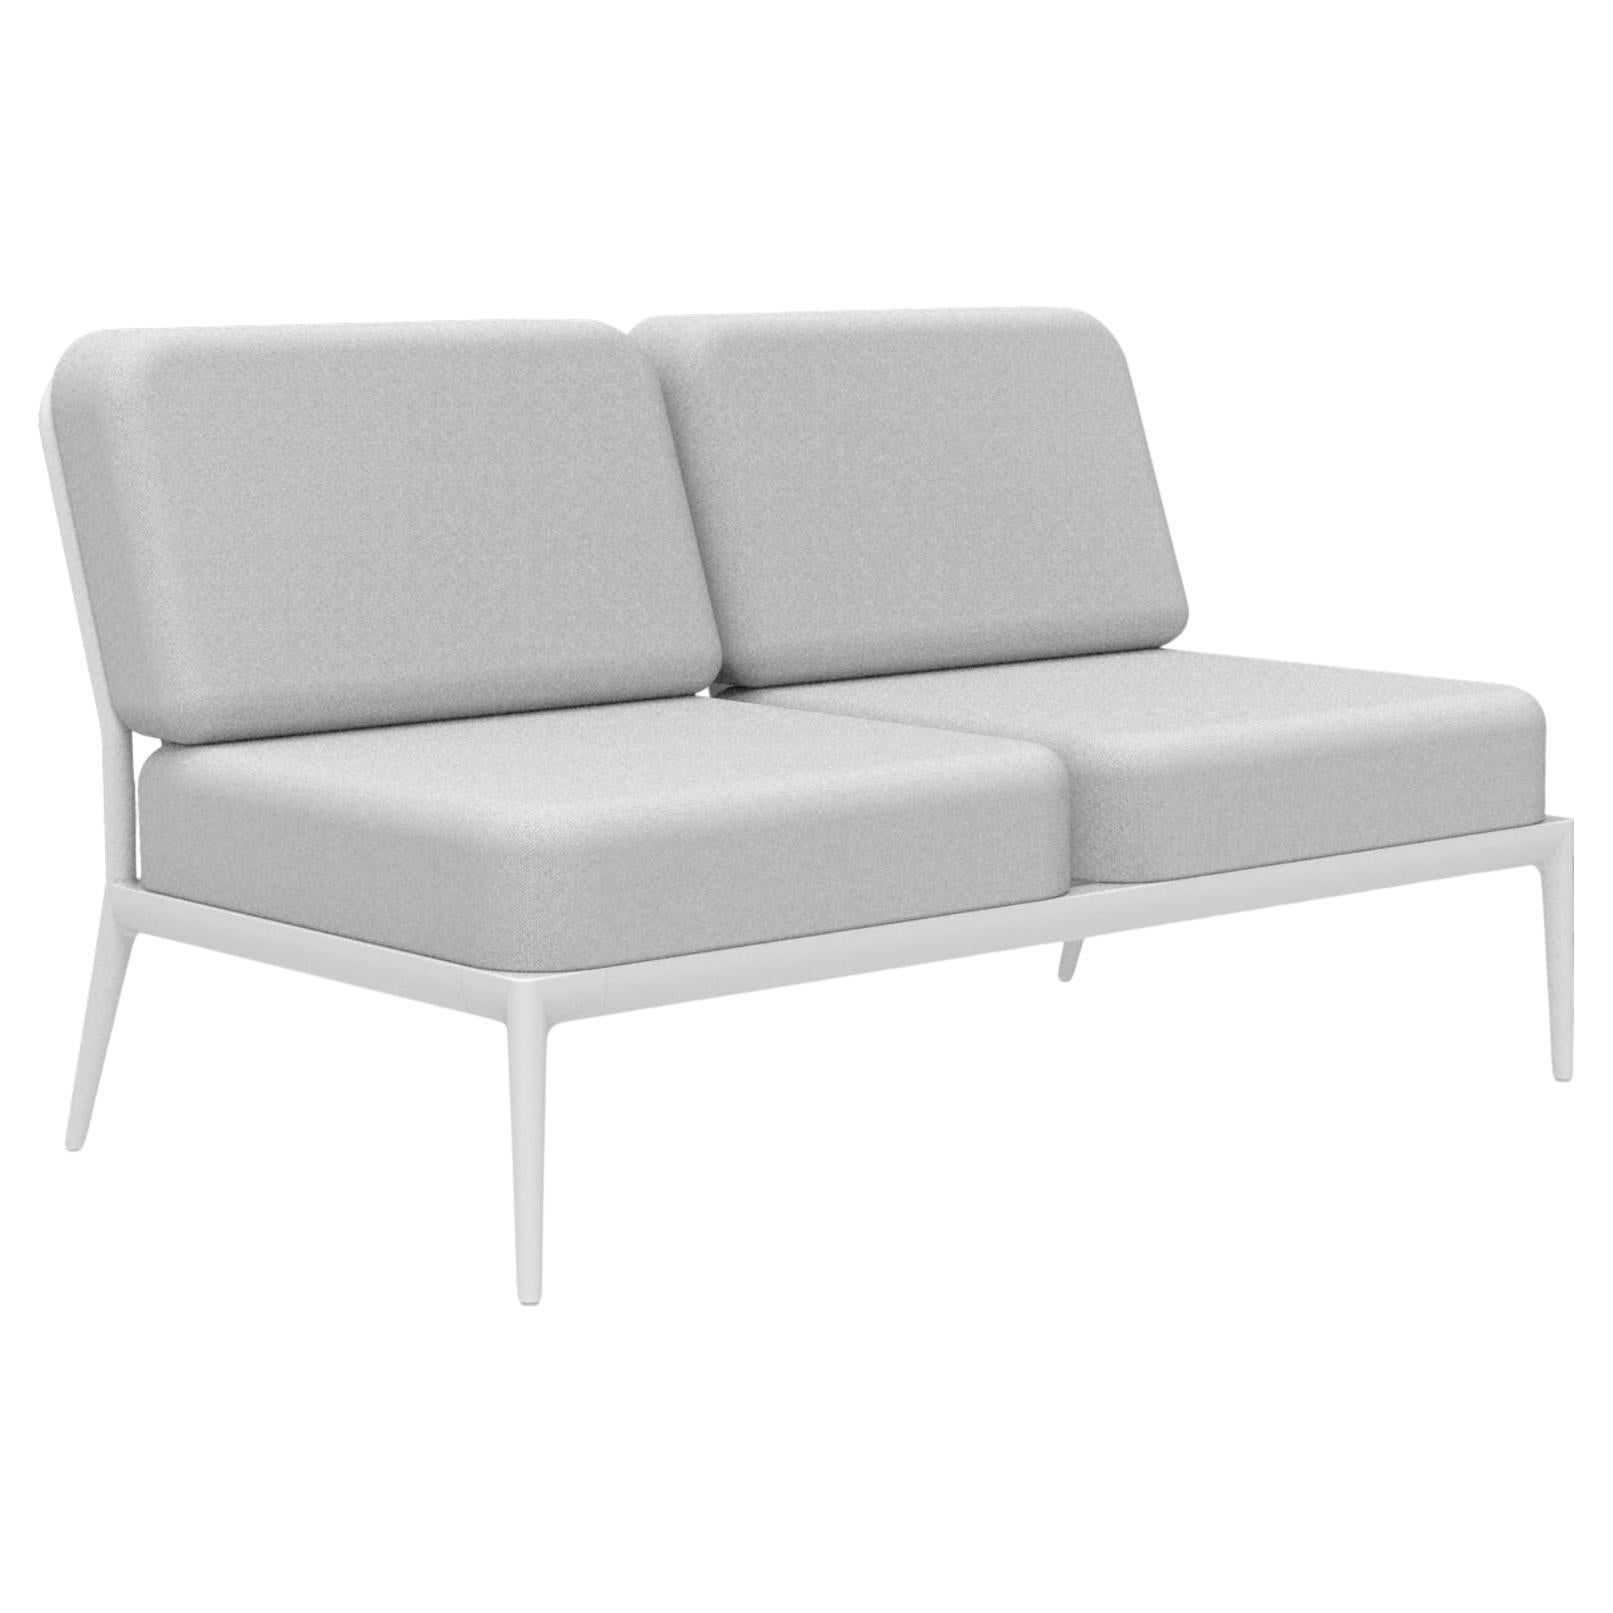 Ribbons White Double Central Modular Sofa by MOWEE For Sale